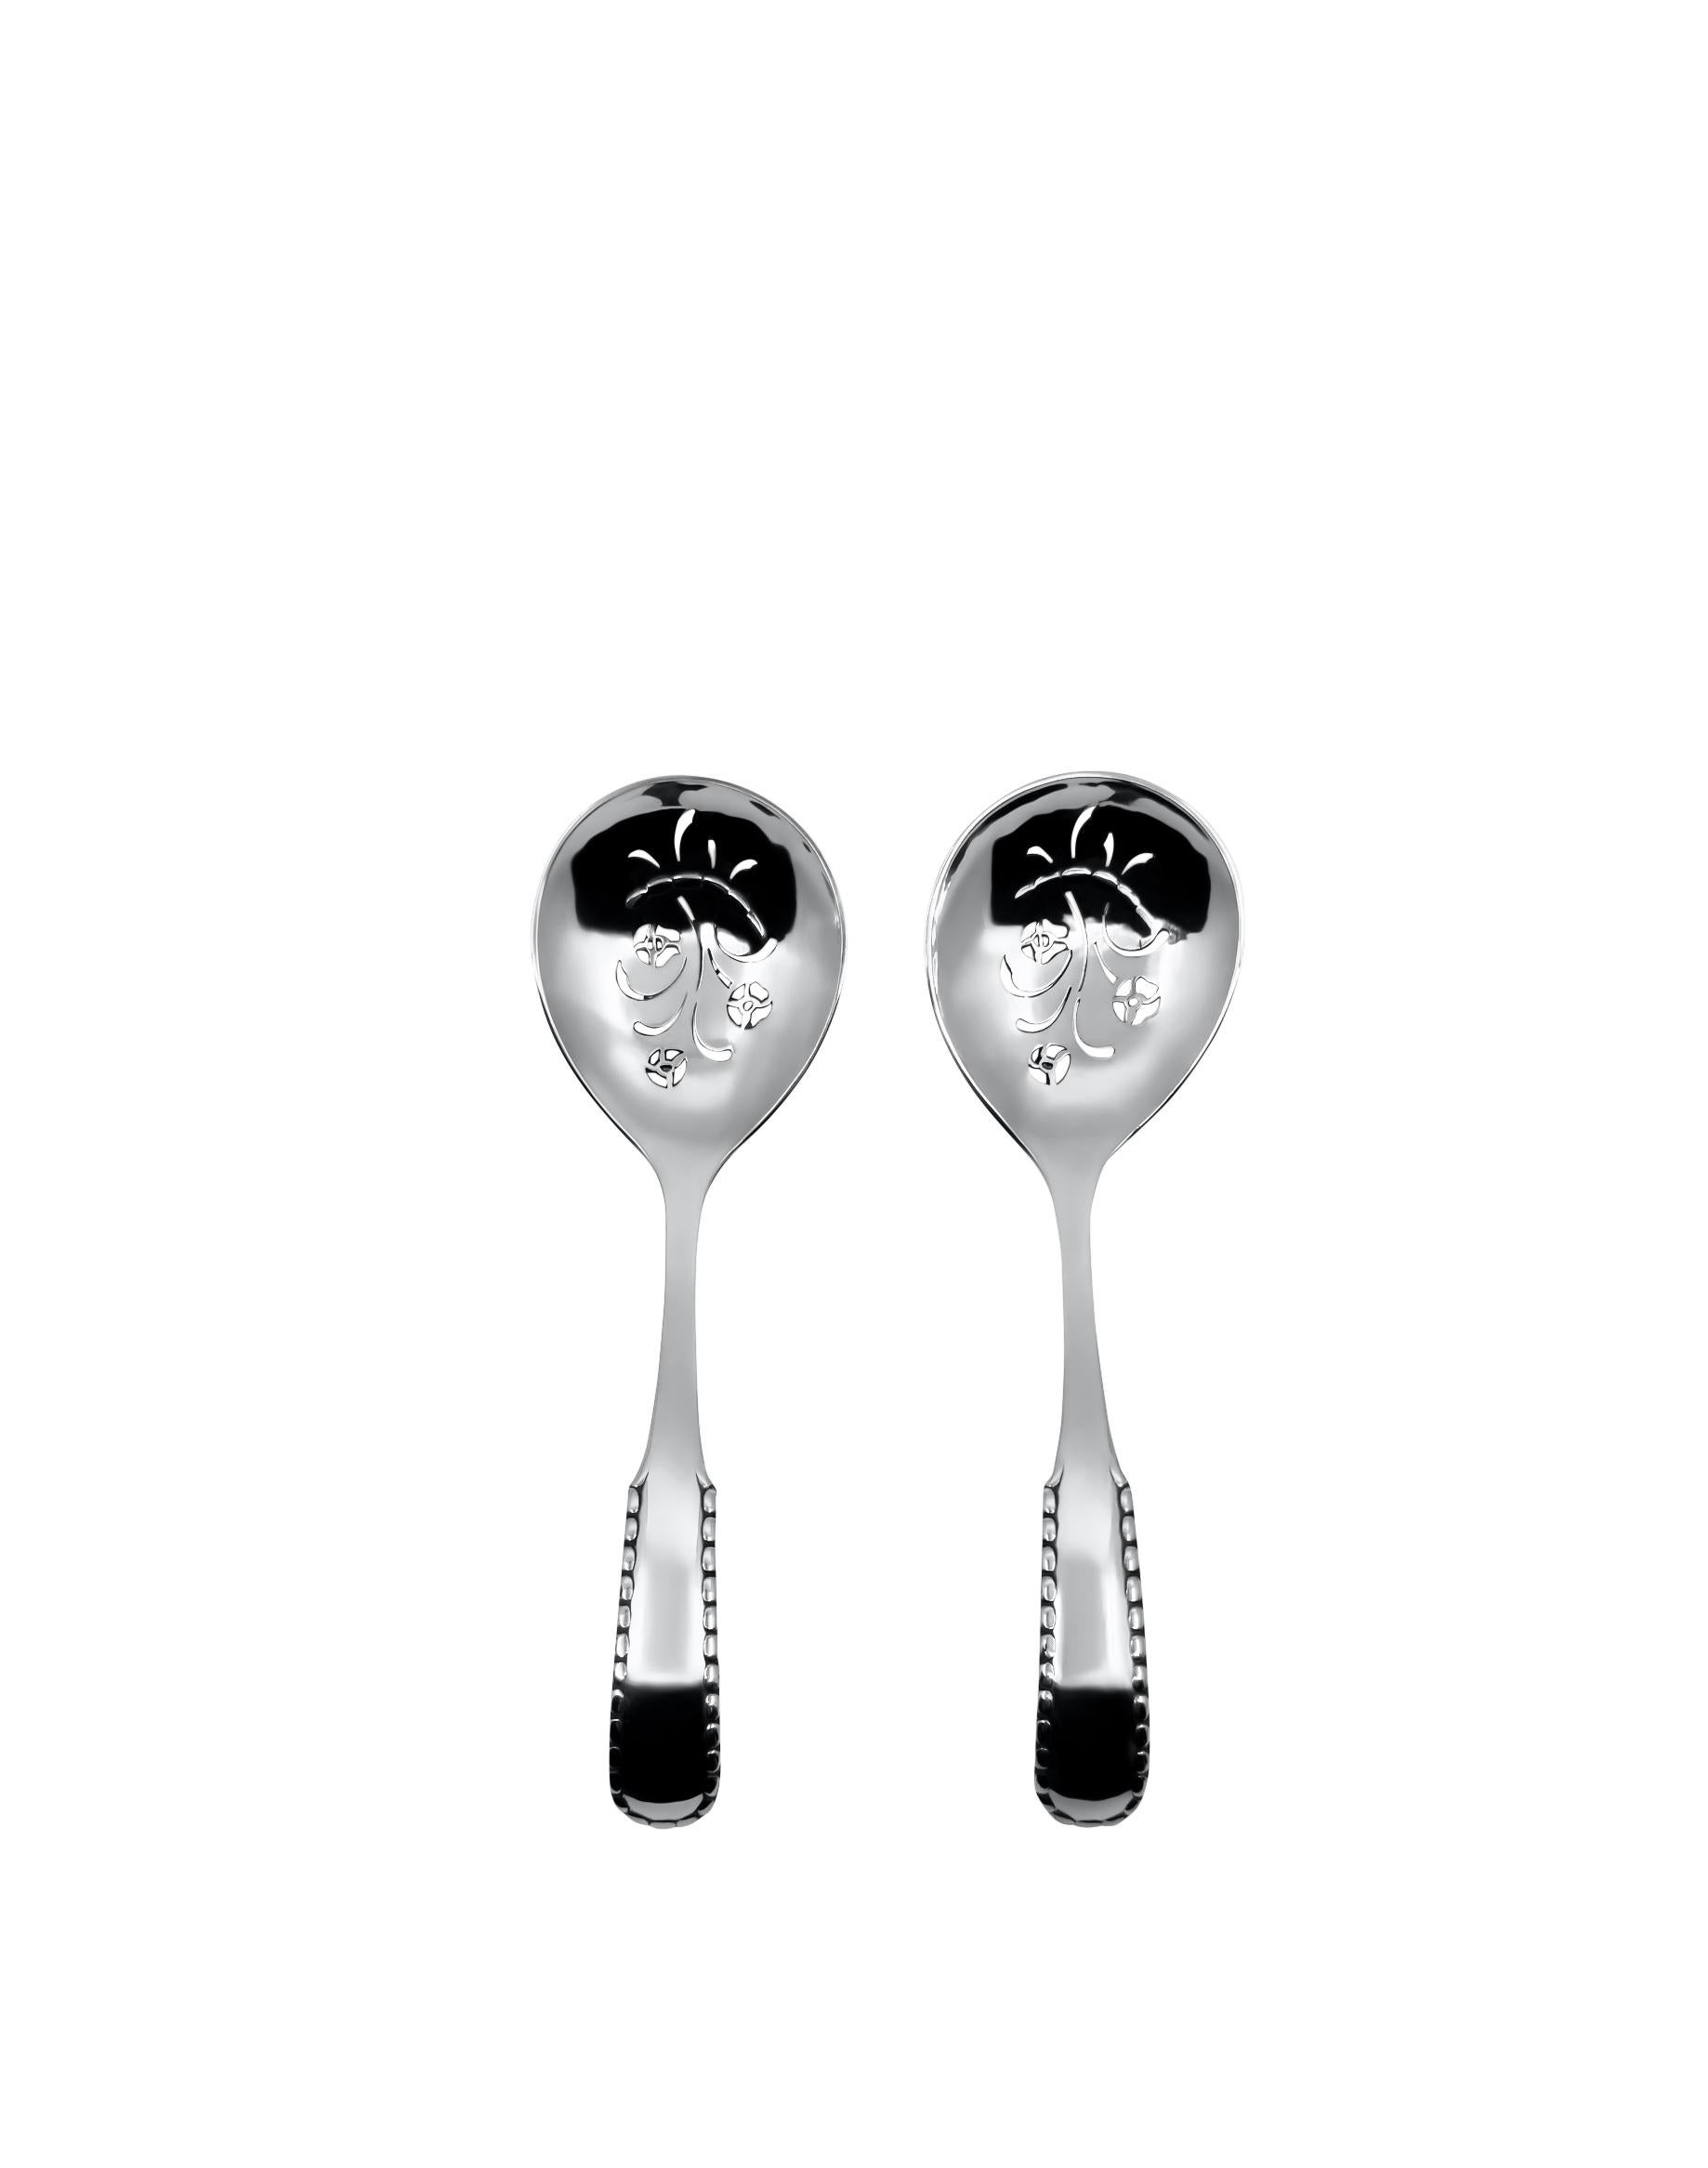 a set of two Rope/Perle pattern antique sugar sifters crafted in 830 sterling silver by Georg Jensen.  Each sifter is meticulously hand-forged, adorned with intricate cut-out floral designs. Both pieces bear matching hallmarks indicative of their